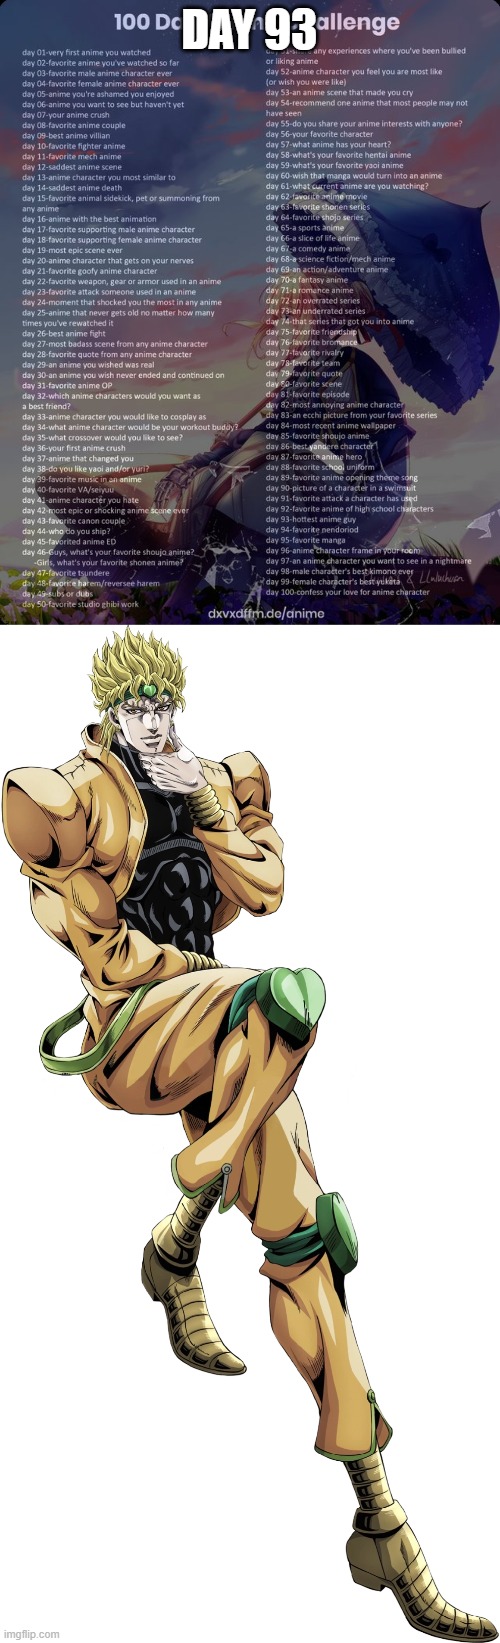 Day 93: DIO (JoJo's Bizarre Adventure Part 3: Stardust Crusaders) | DAY 93 | image tagged in 100 day anime challenge | made w/ Imgflip meme maker